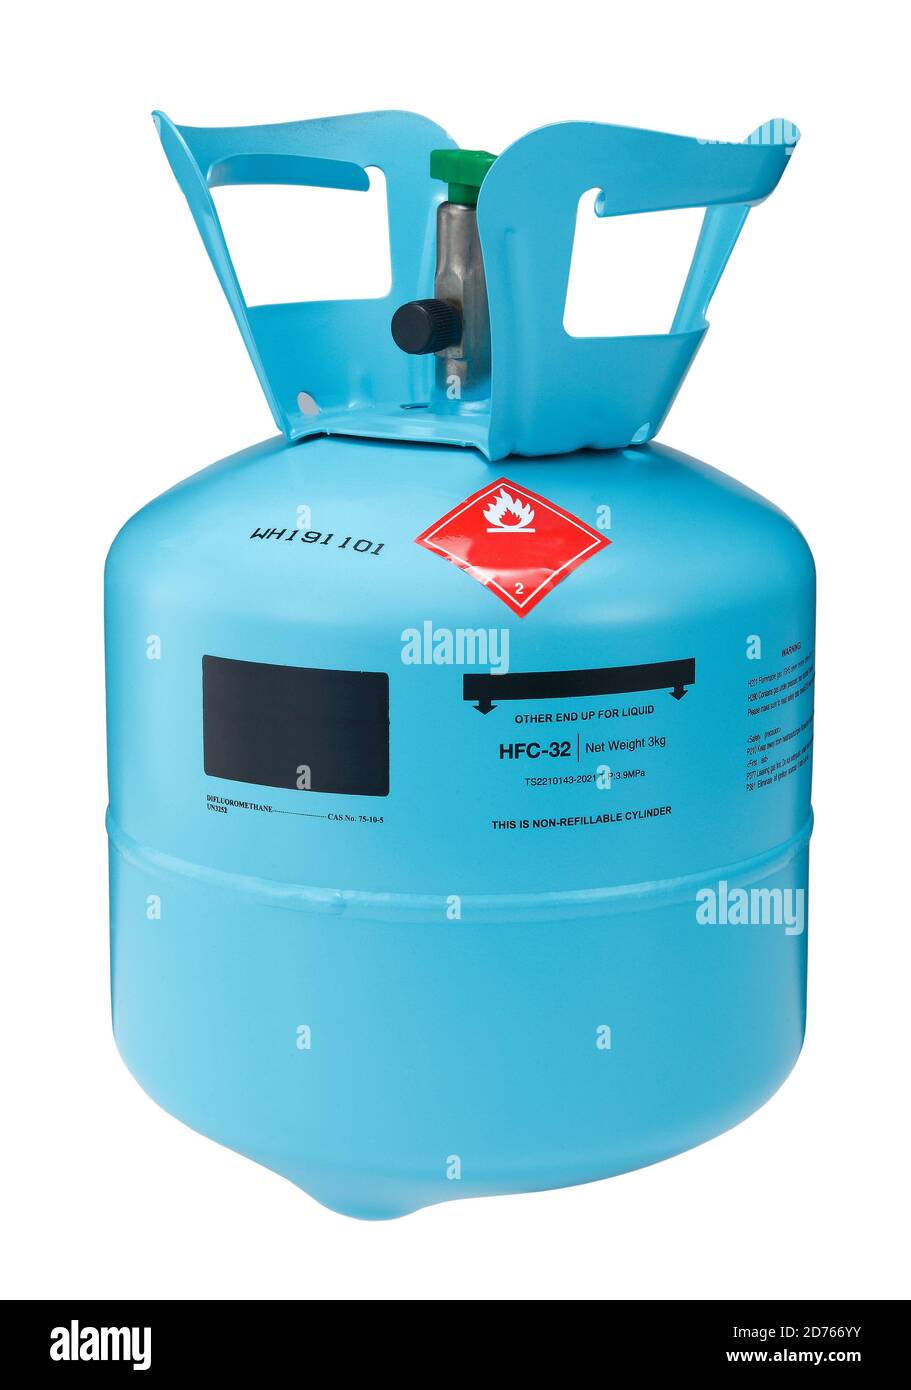 https://c8.alamy.com/comp/2D766YY/r32-refrigerant-r32-refrigerant-is-also-known-as-difluoromethane-and-belongs-to-the-hfc-family-of-refrigerant-2D766YY.jpg